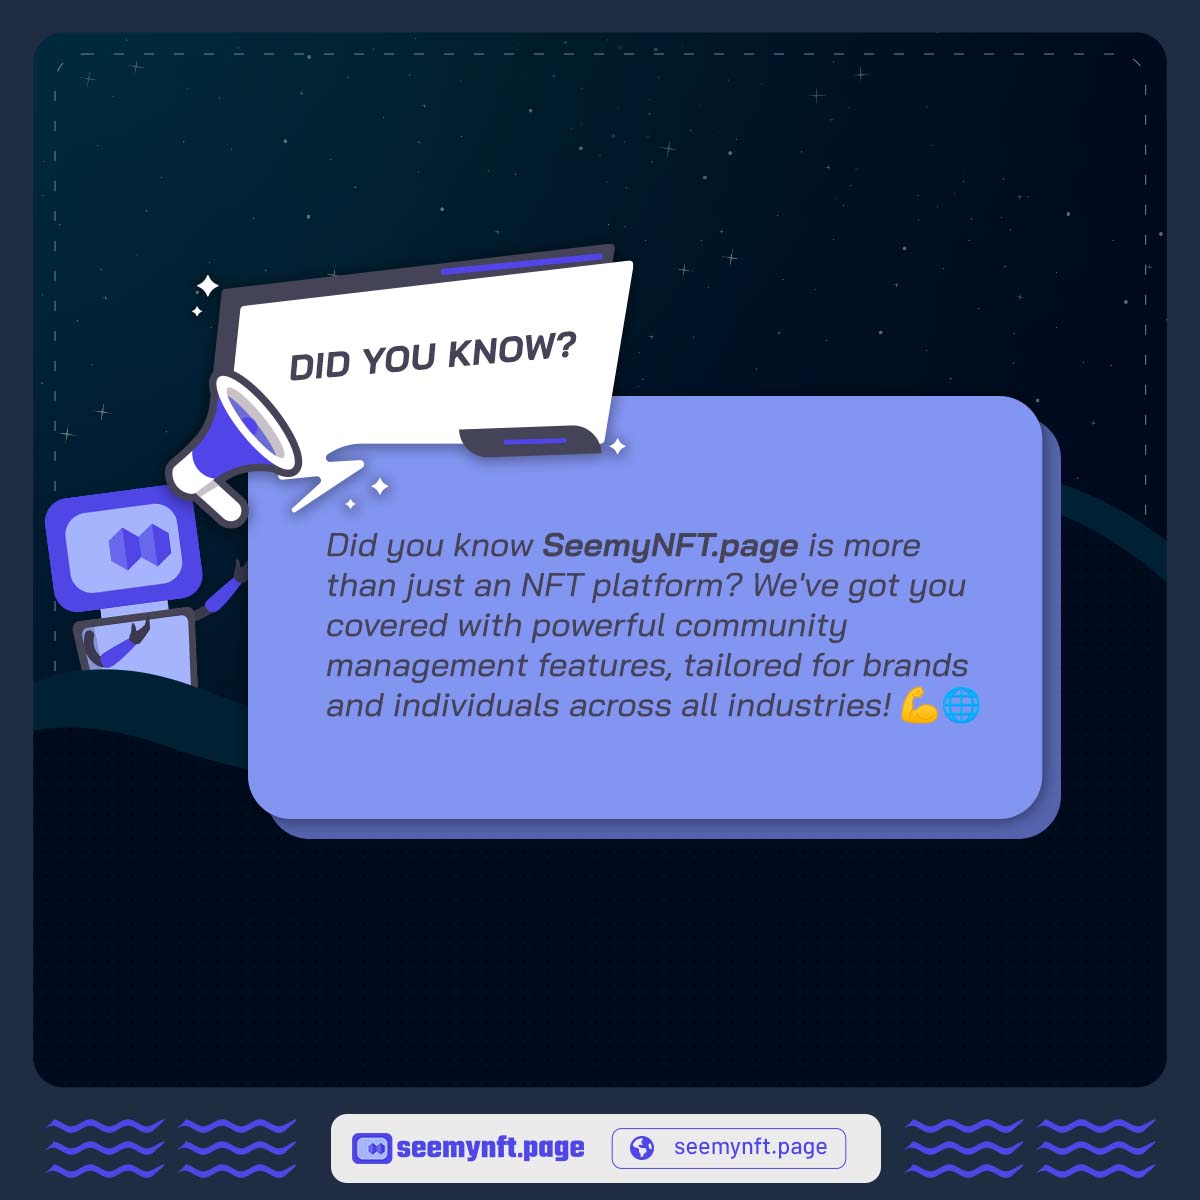 Did you know SeemyNFT.page is more than just an NFT platform? We've got you covered with powerful community management features, tailored for brands and individuals across all industries! 💪🌐 Learn more seemynft.page #nft #NFTs #nftcommunity